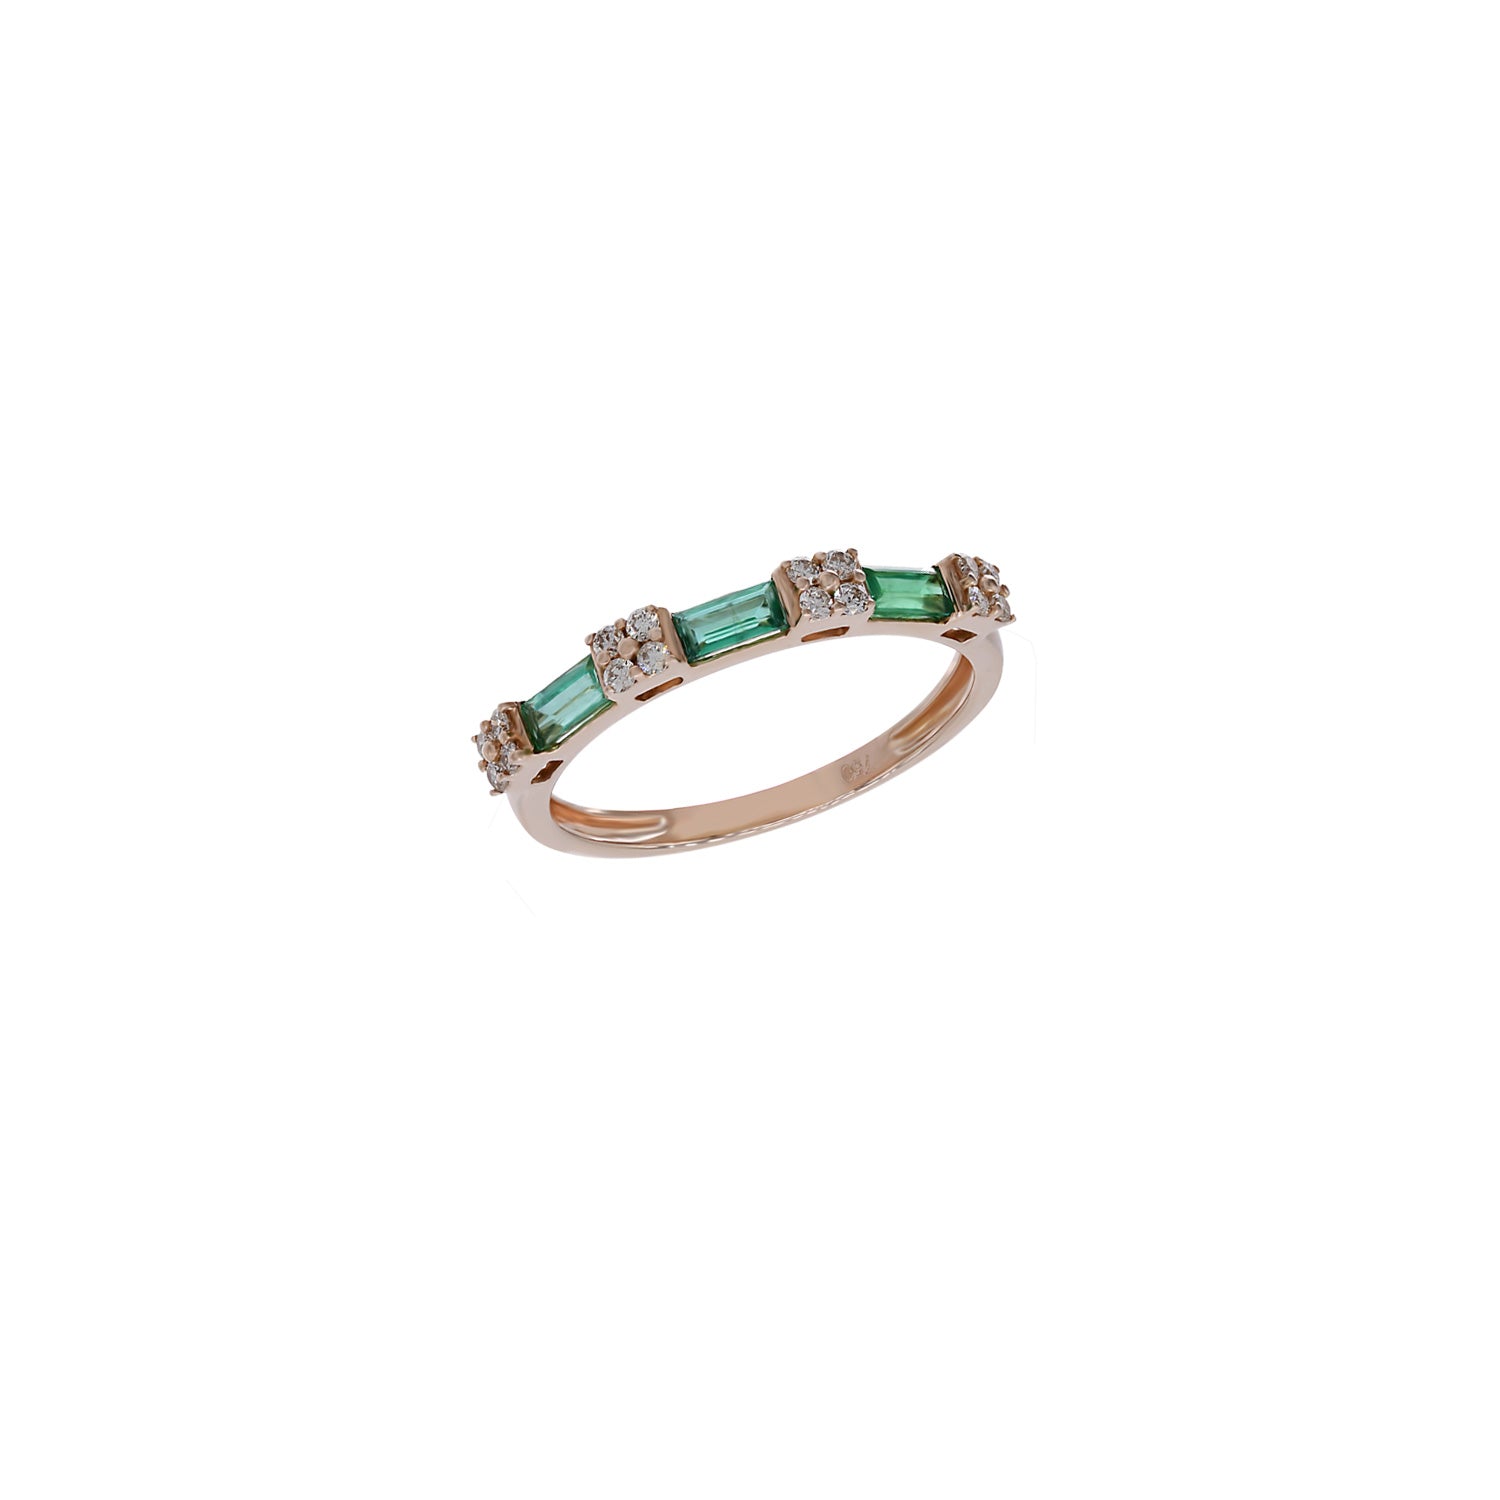 Diamond and Emerald Ring. Eternity Ring